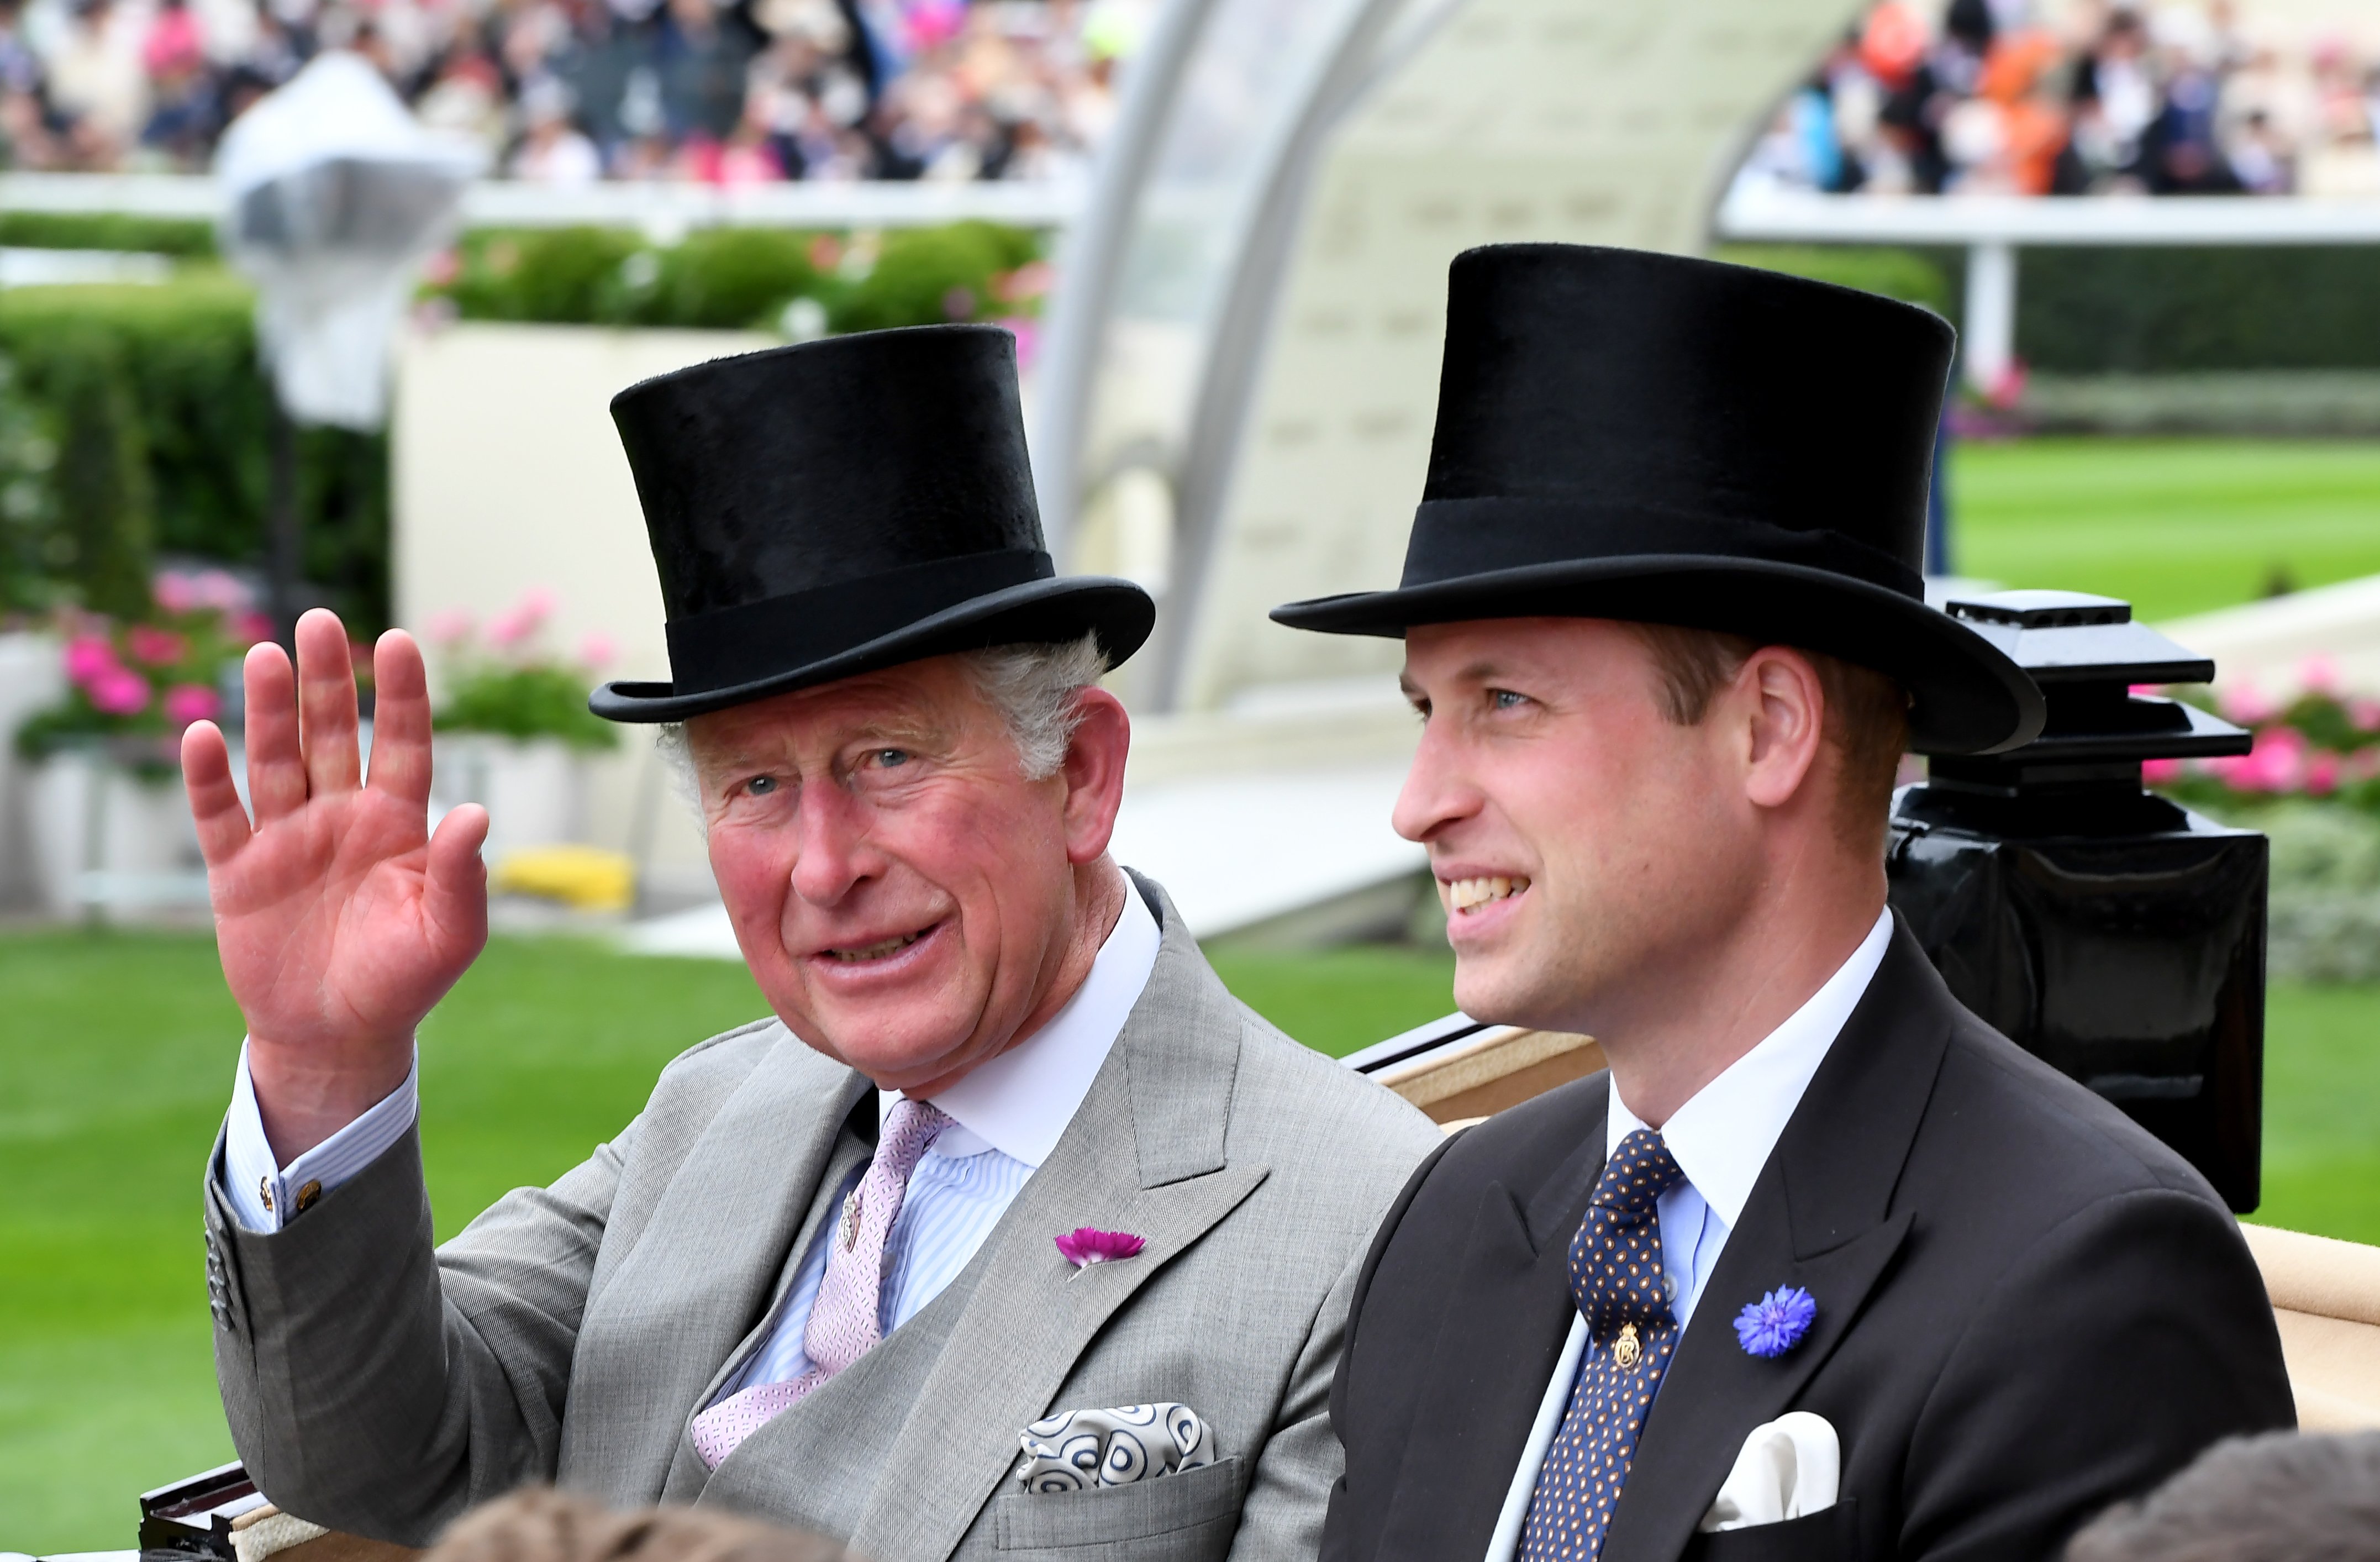 Prince Charles and Prince William in an open carriage to attend the Royal Ascot on June 18, 2019, in Ascot, England. | Source: Anwar Hussein/WireImage/Getty Images